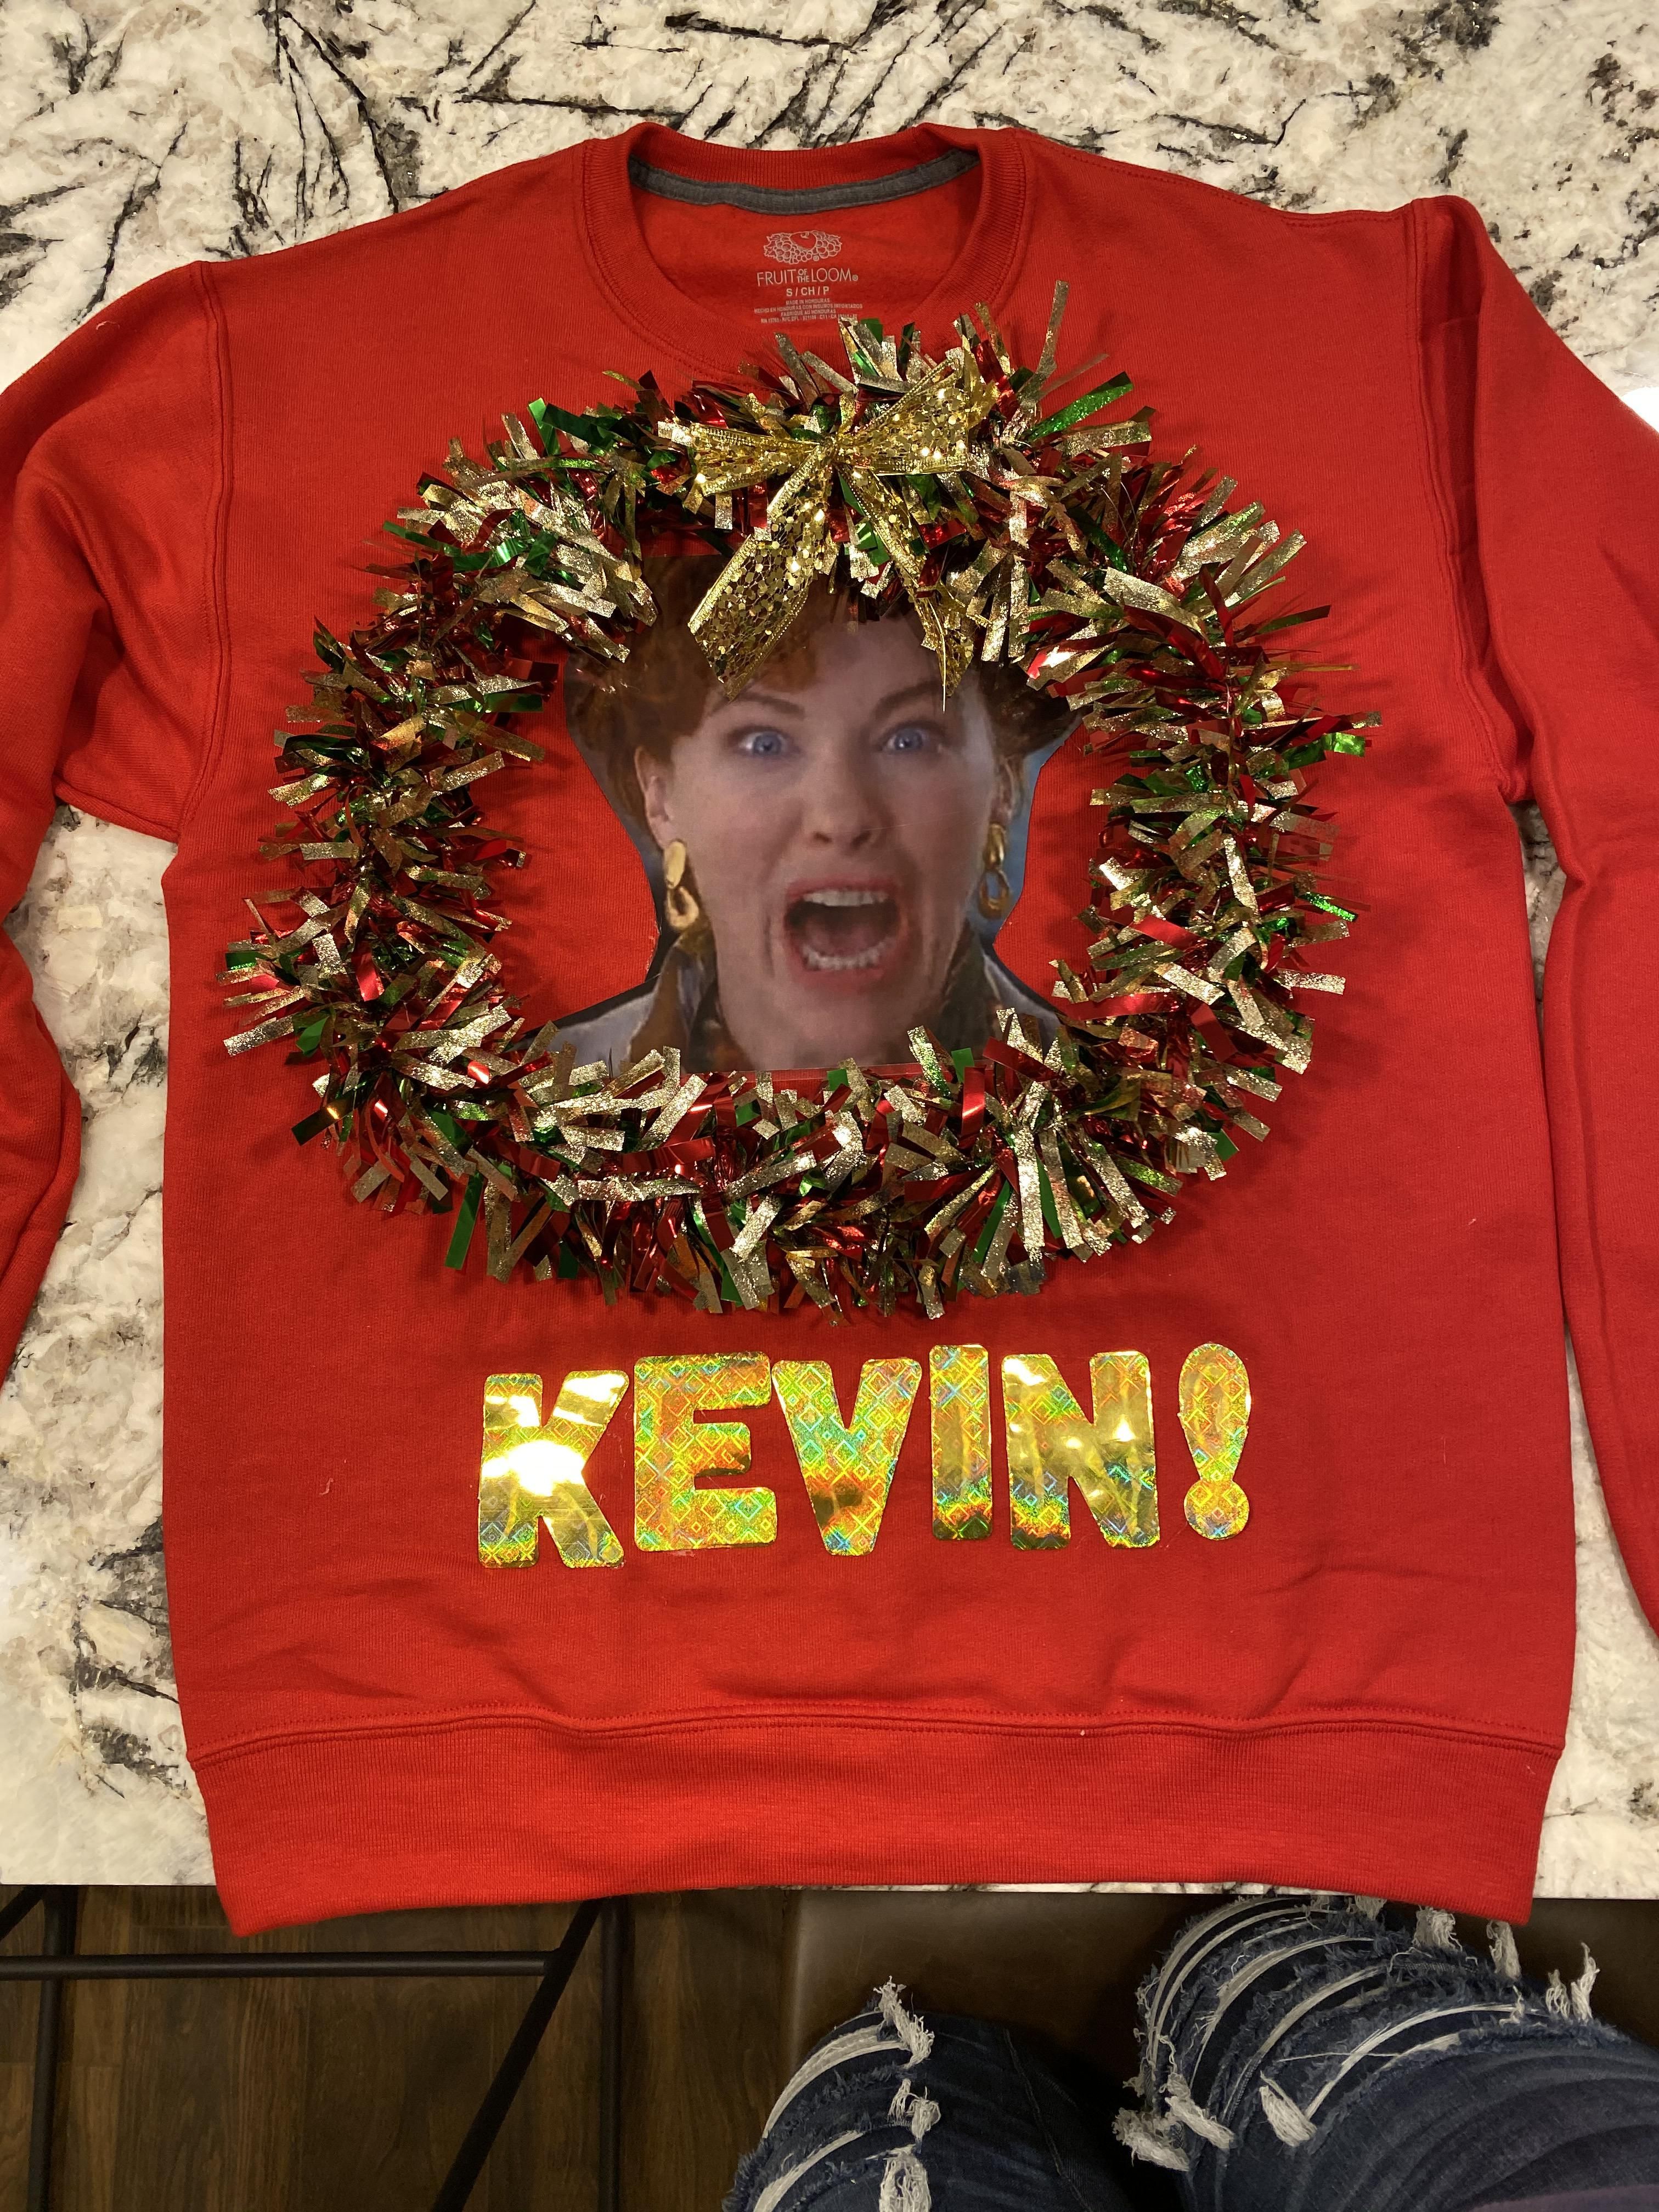 Made this for my ugly sweater party.